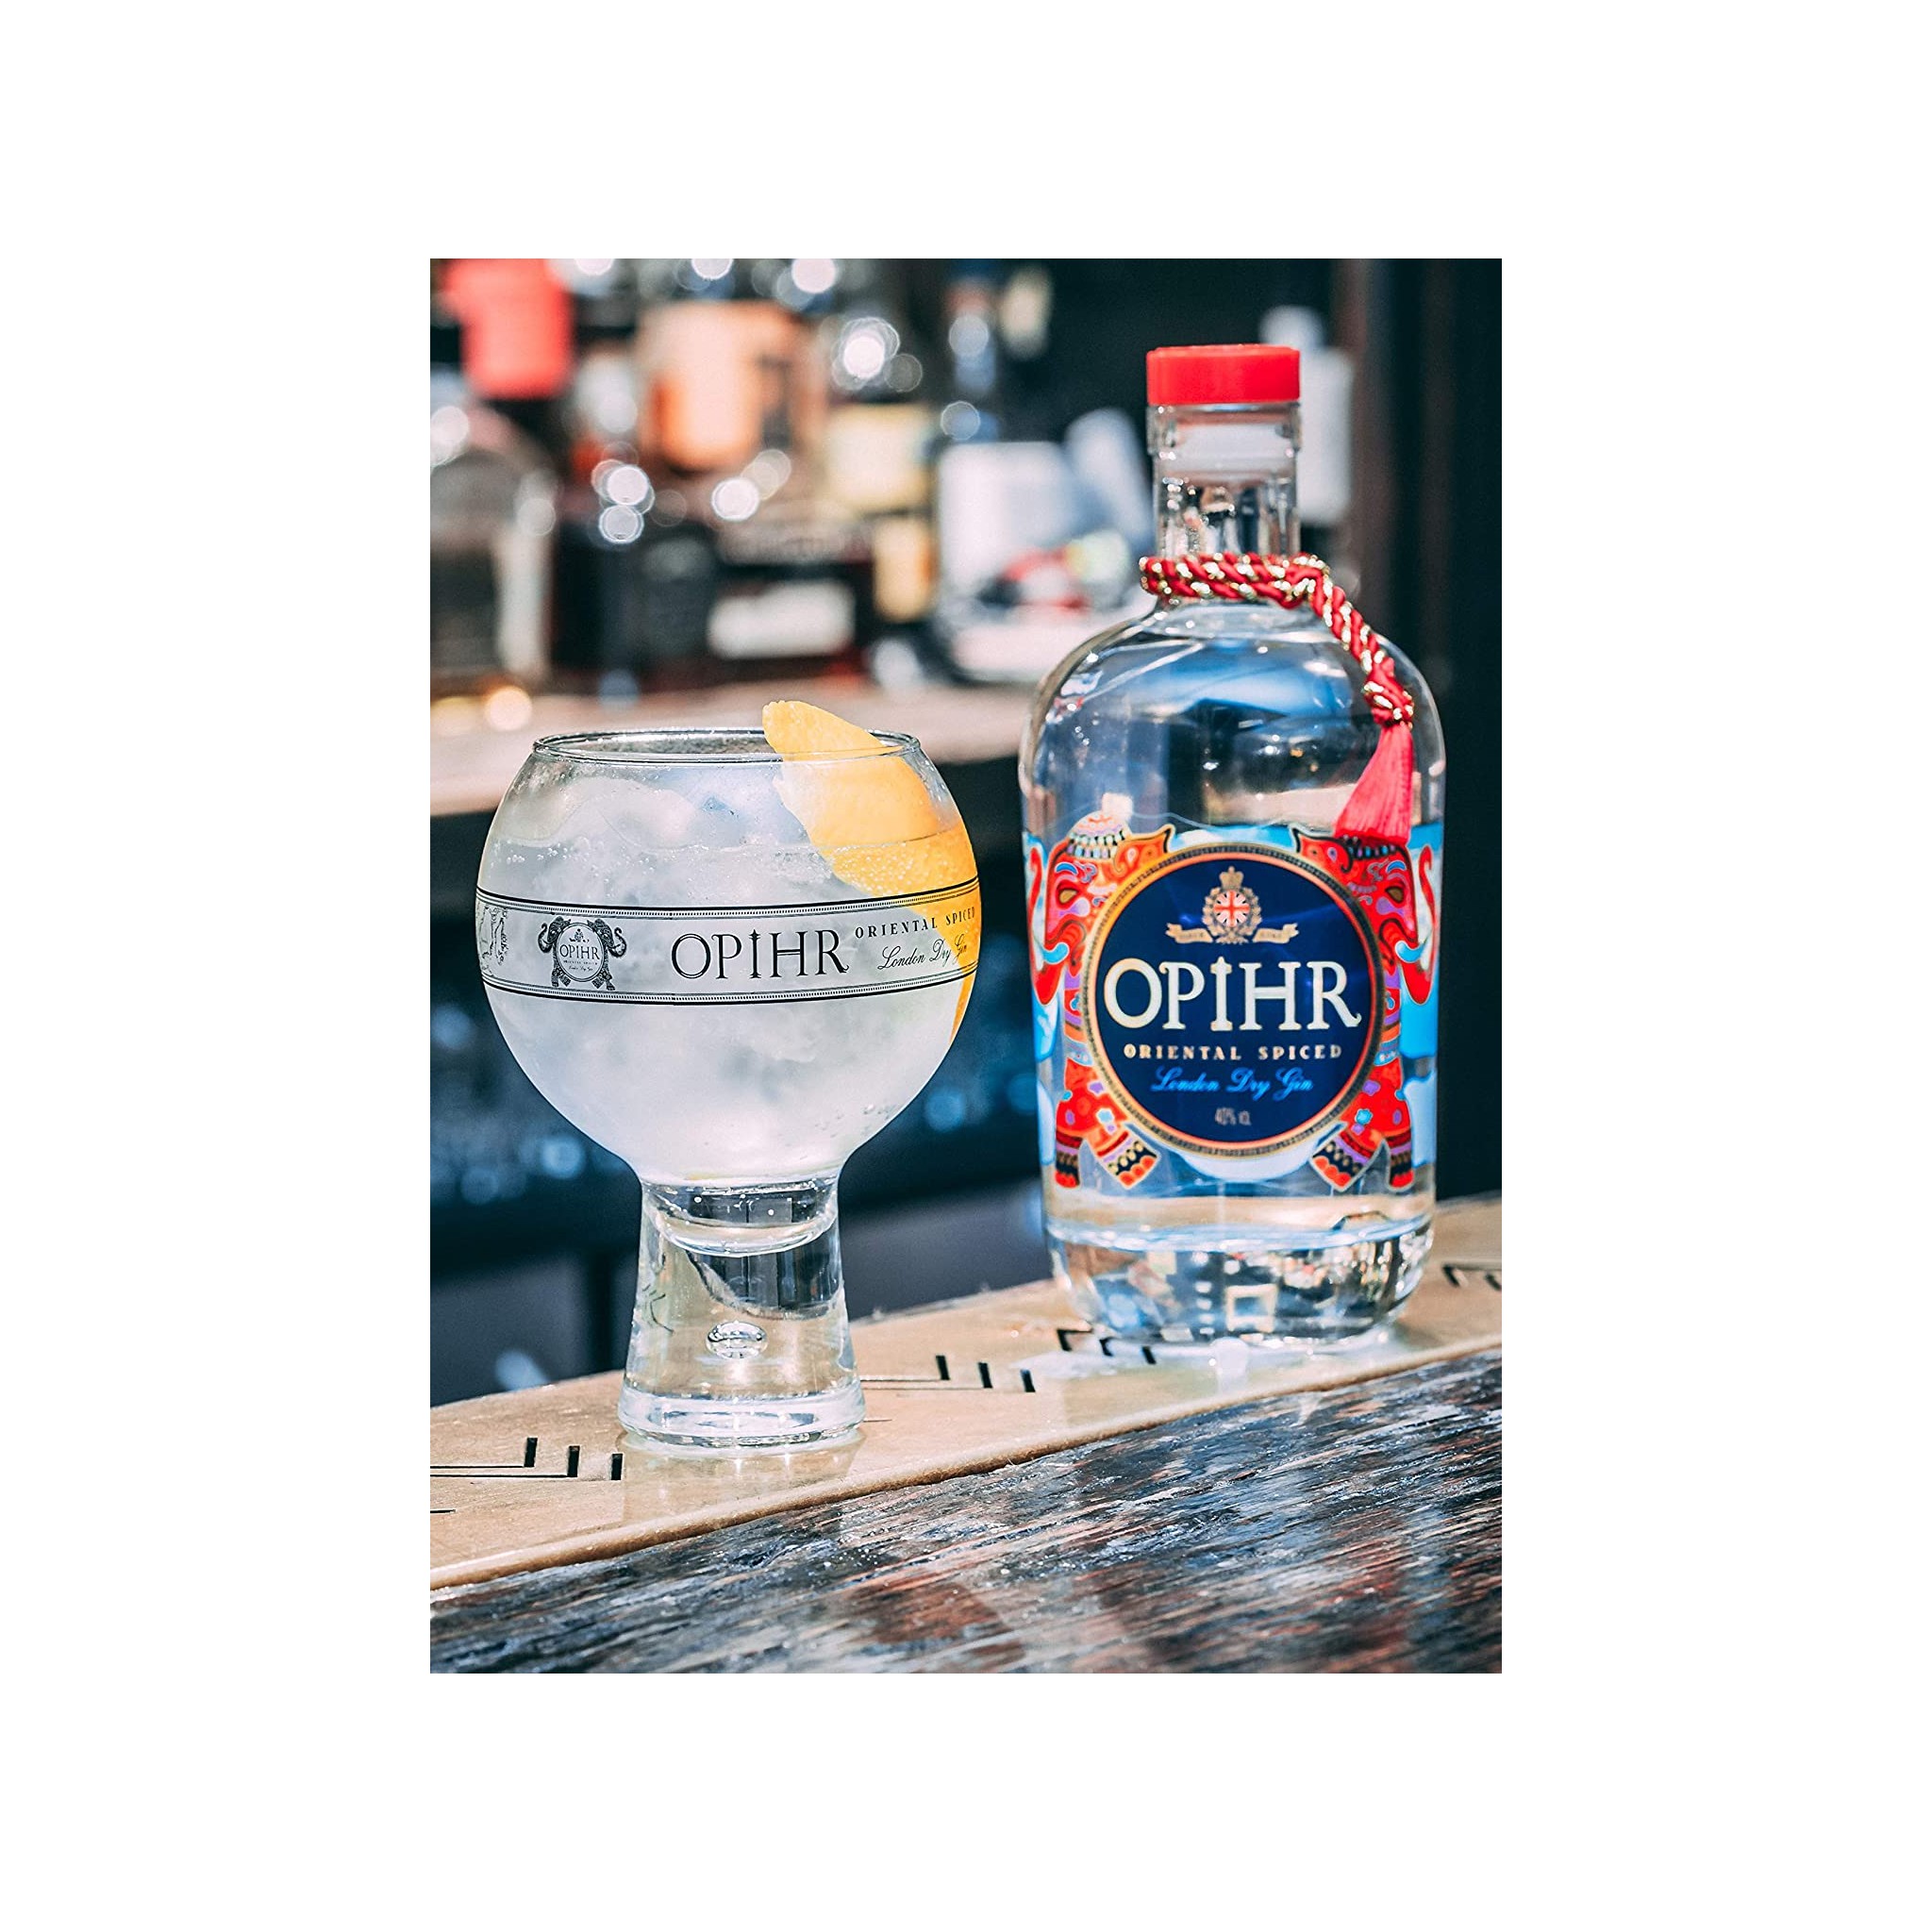 Ophir Opihr Gin, Online london and sales Gin. Quality! online dry Shop botanical price Indian gin. best